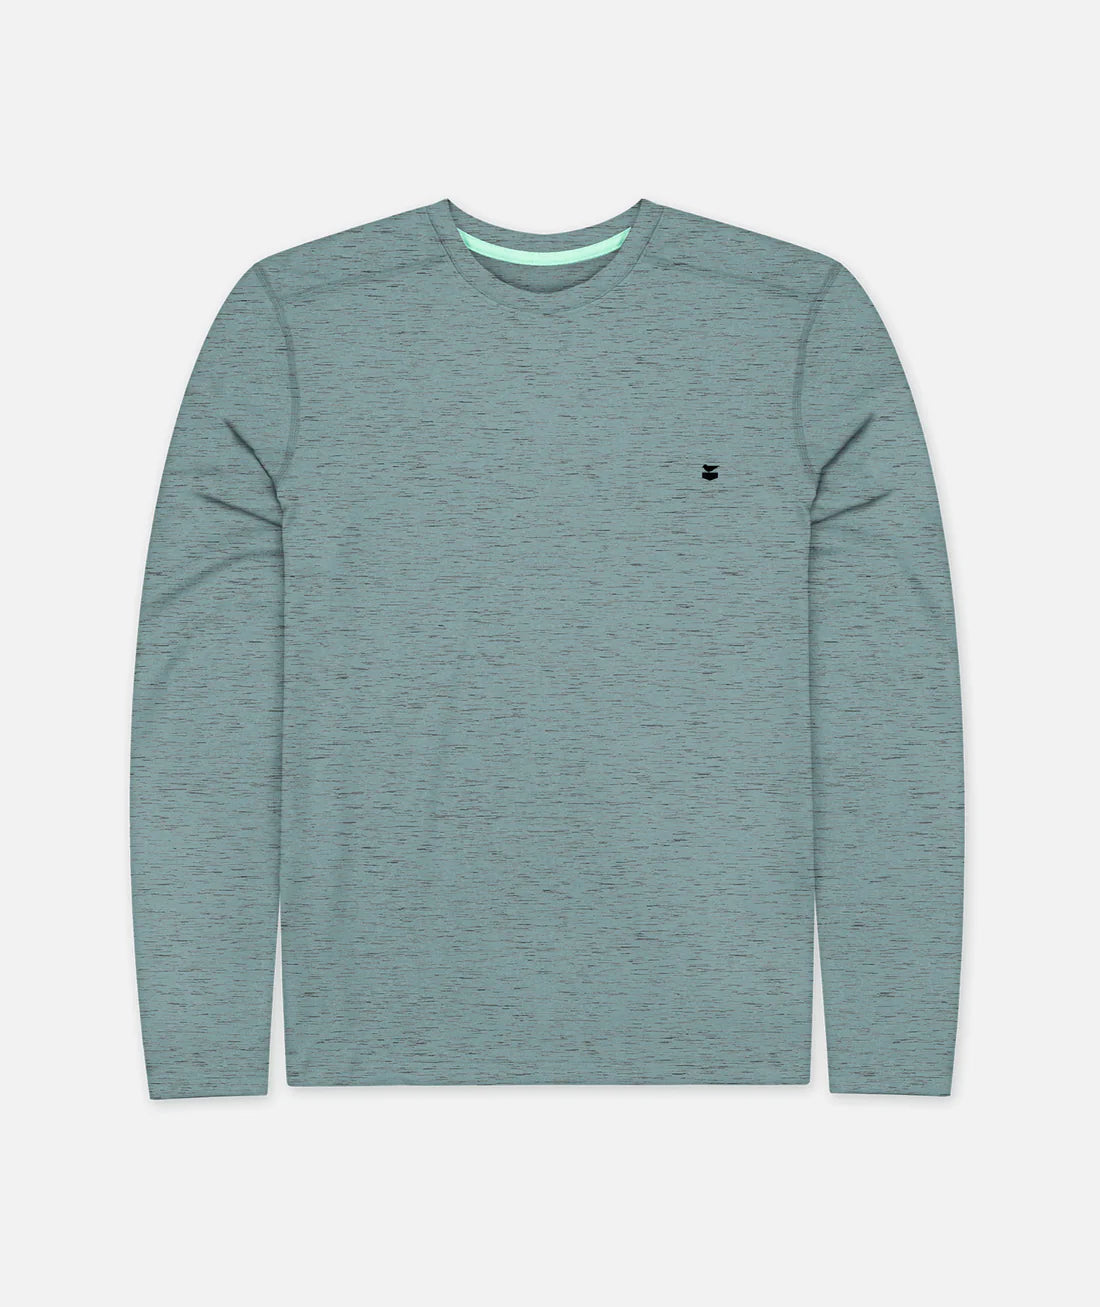 Jetty's Brigantine UV Long Sleeve Tee in the color Cloud